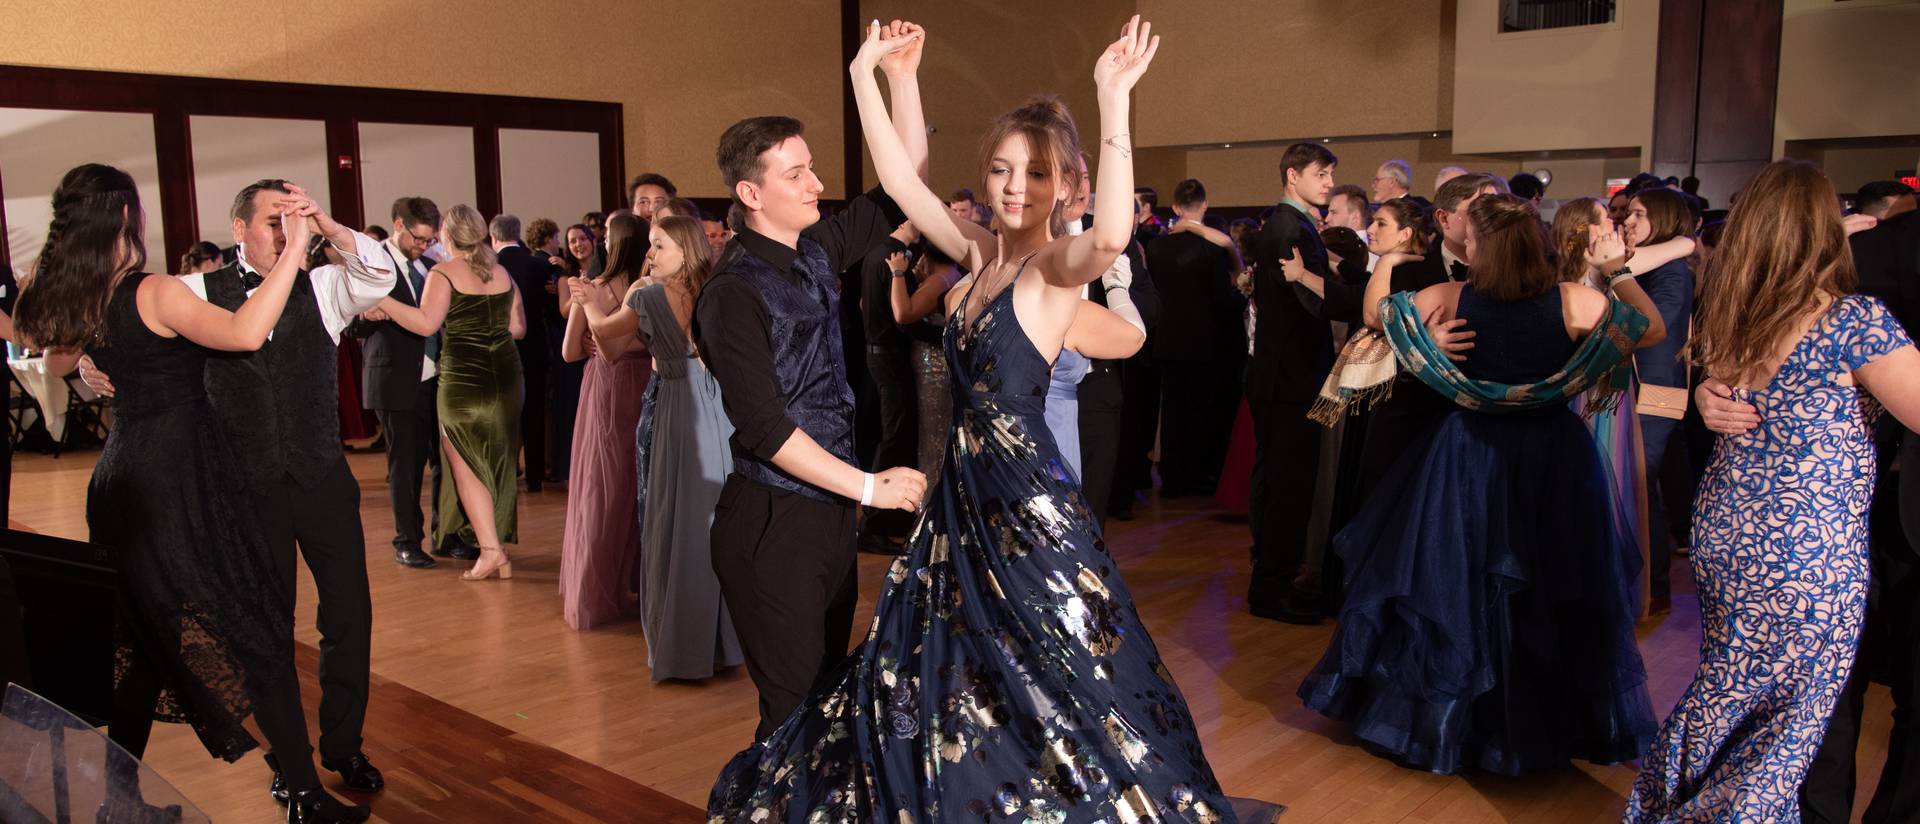 Dancers at the Annual Viennese Ball